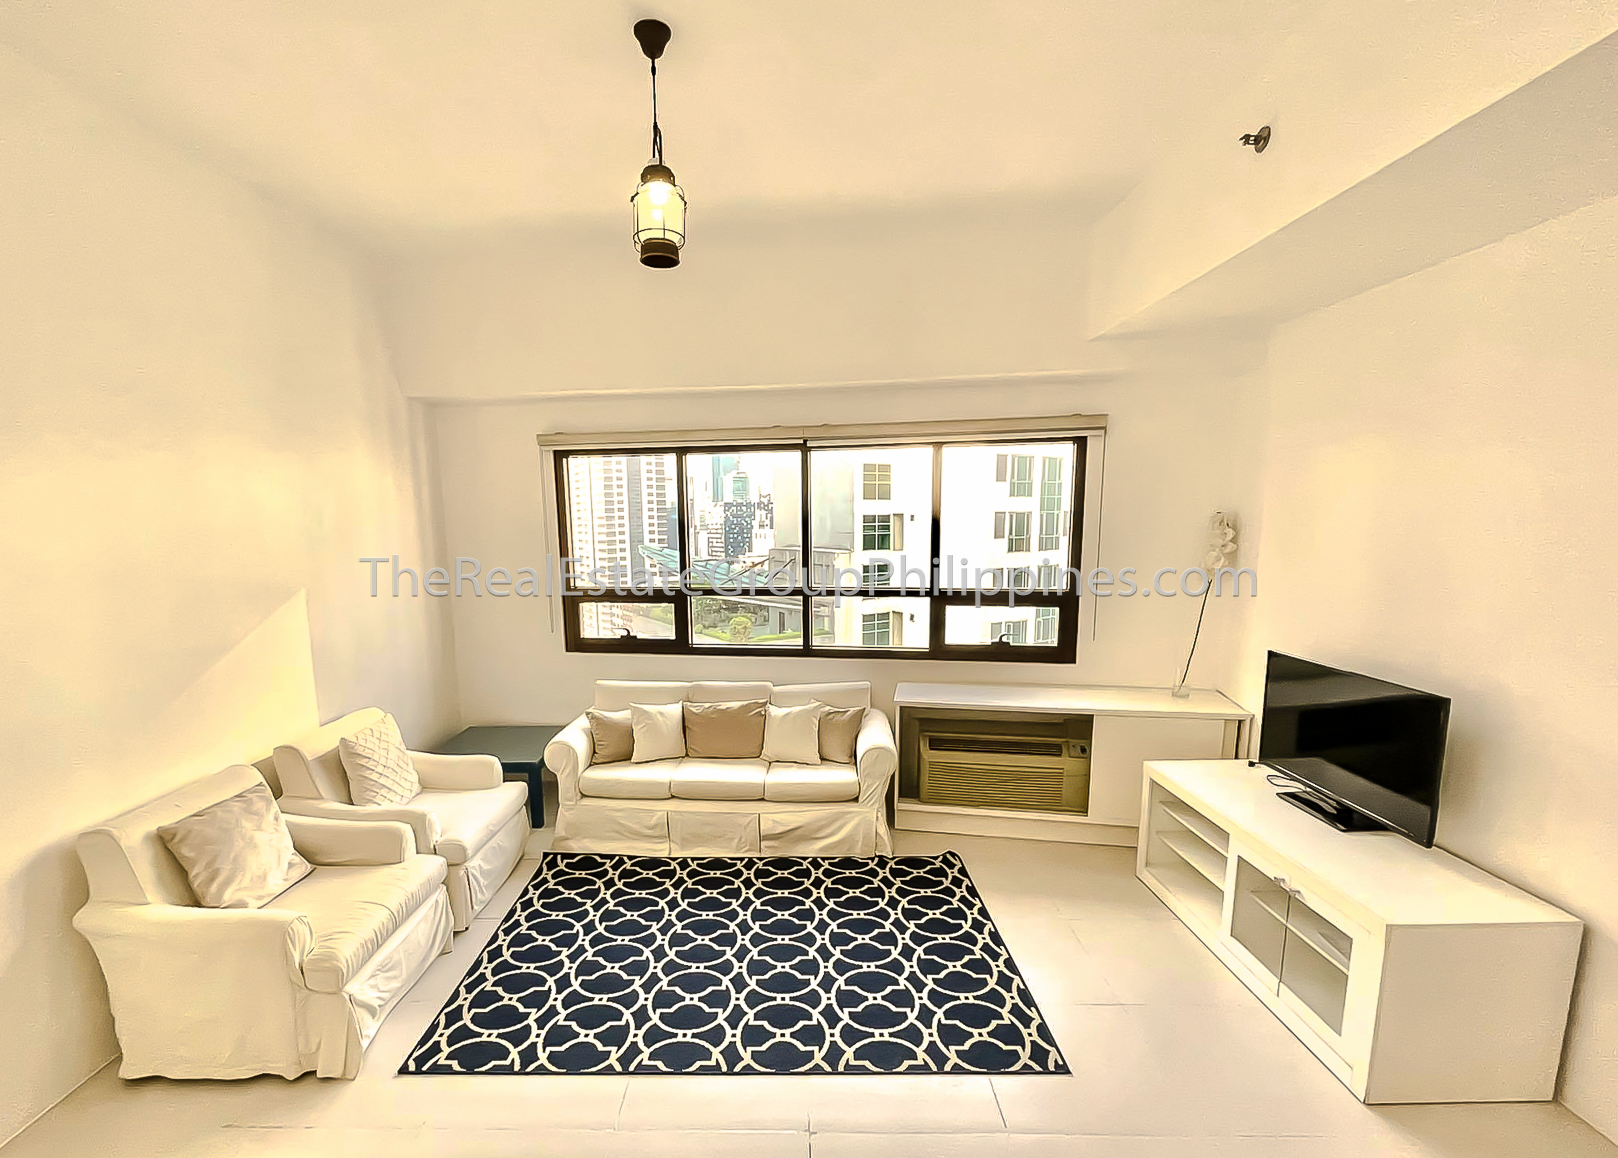 2BR Bi-Level Condo For Rent, Icon Residences Tower 1, BGC-1